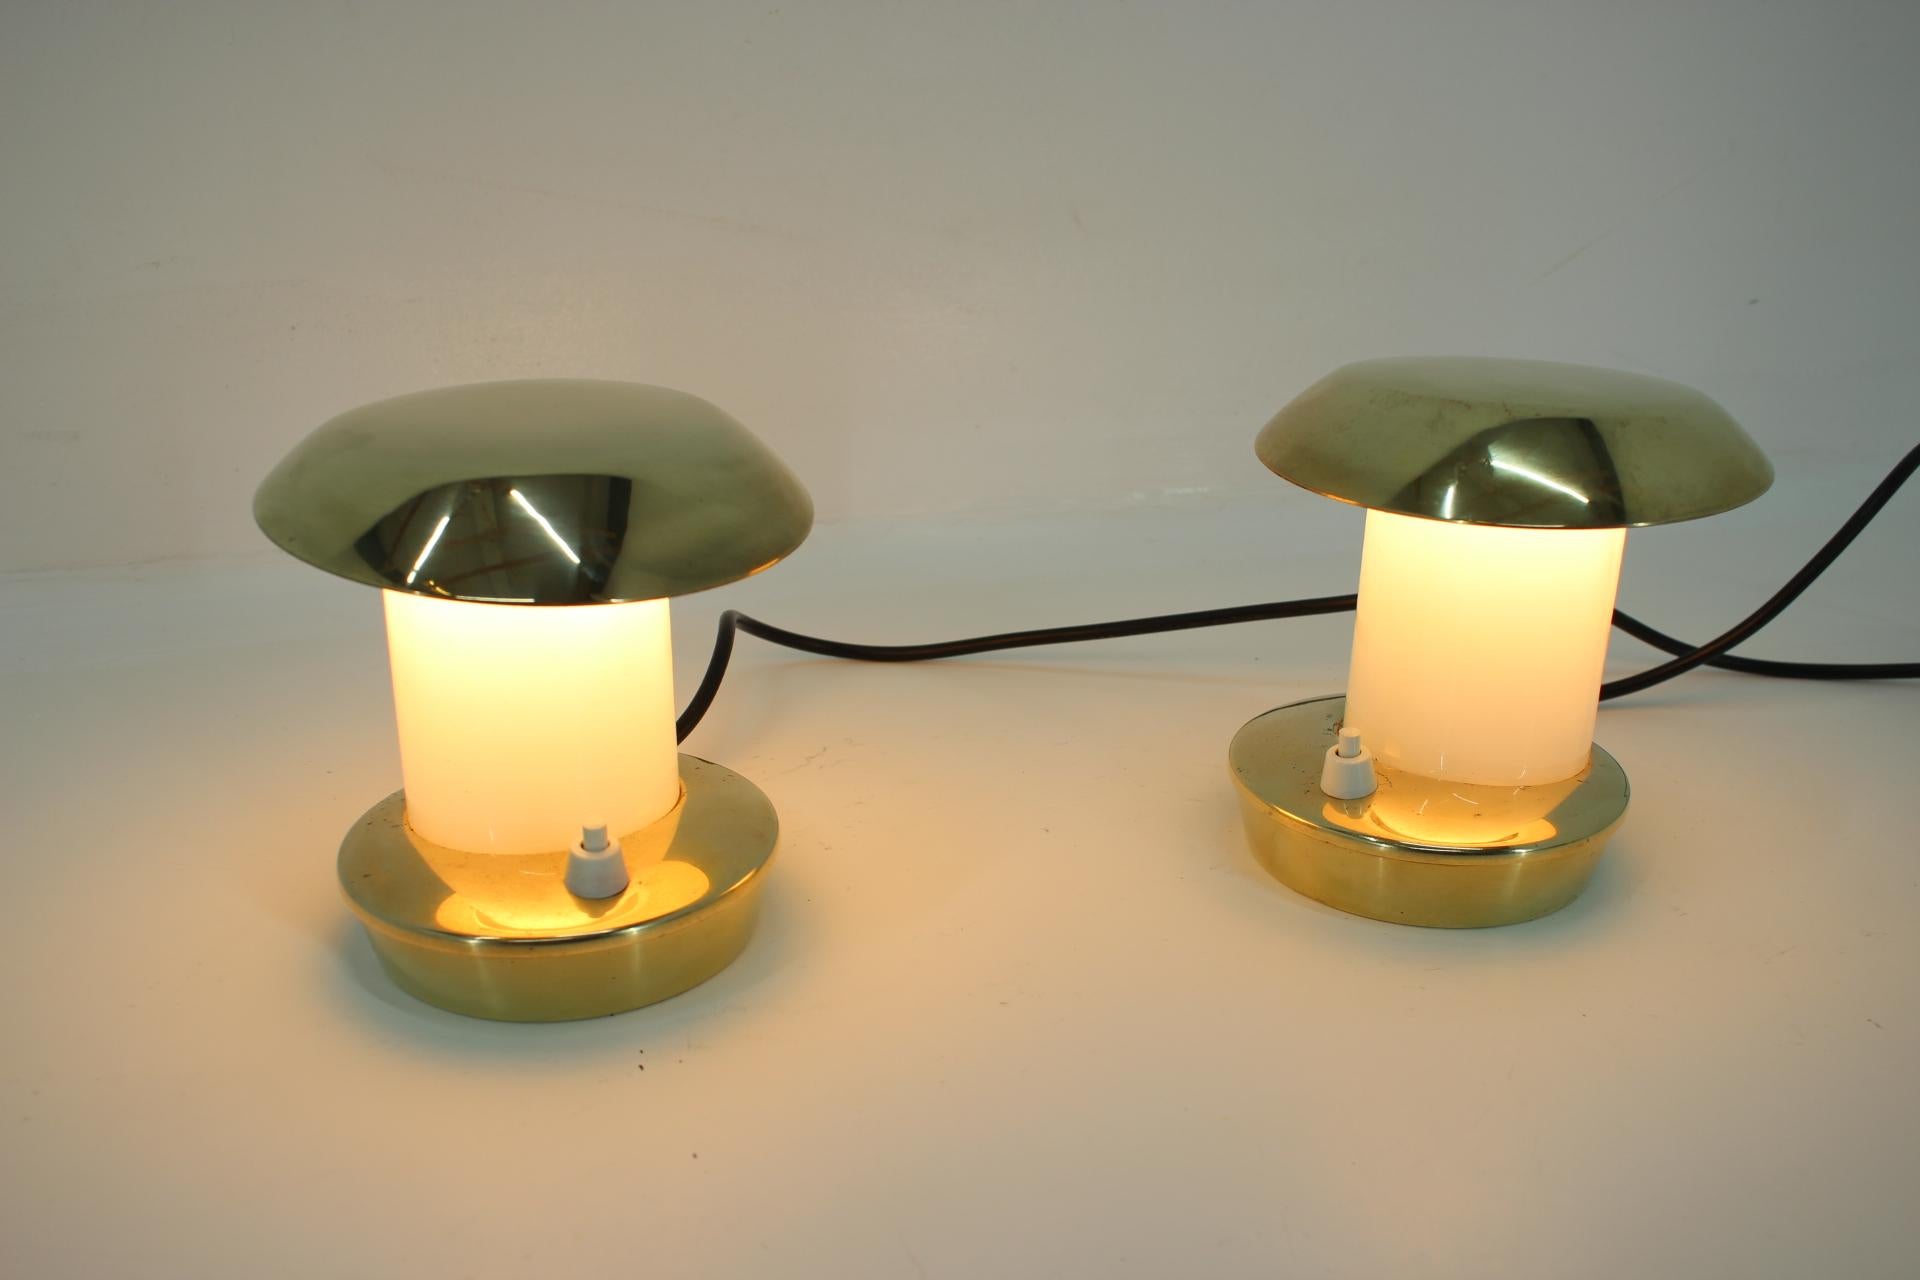 Pair of Rare Brass Glass Bauhaus Table Lamps, 1930s For Sale 1